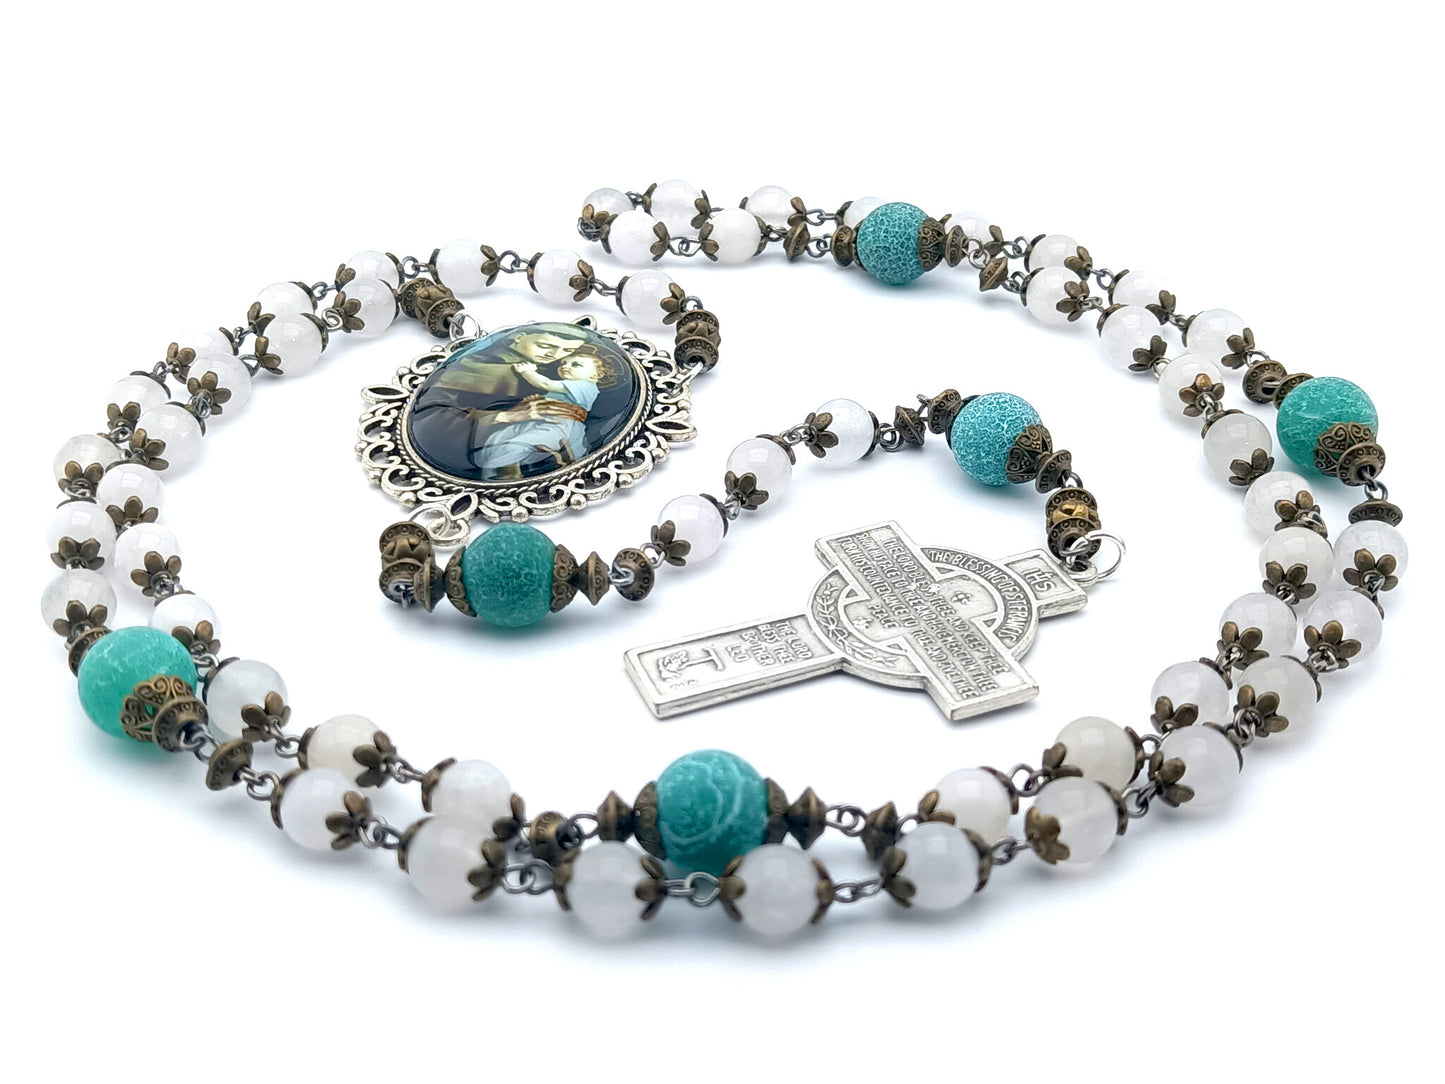 Saint Anthony unique rosary beads with opal gemstone and frosted agate beads, silver Portiuncula crucifix and large picture centre medal.